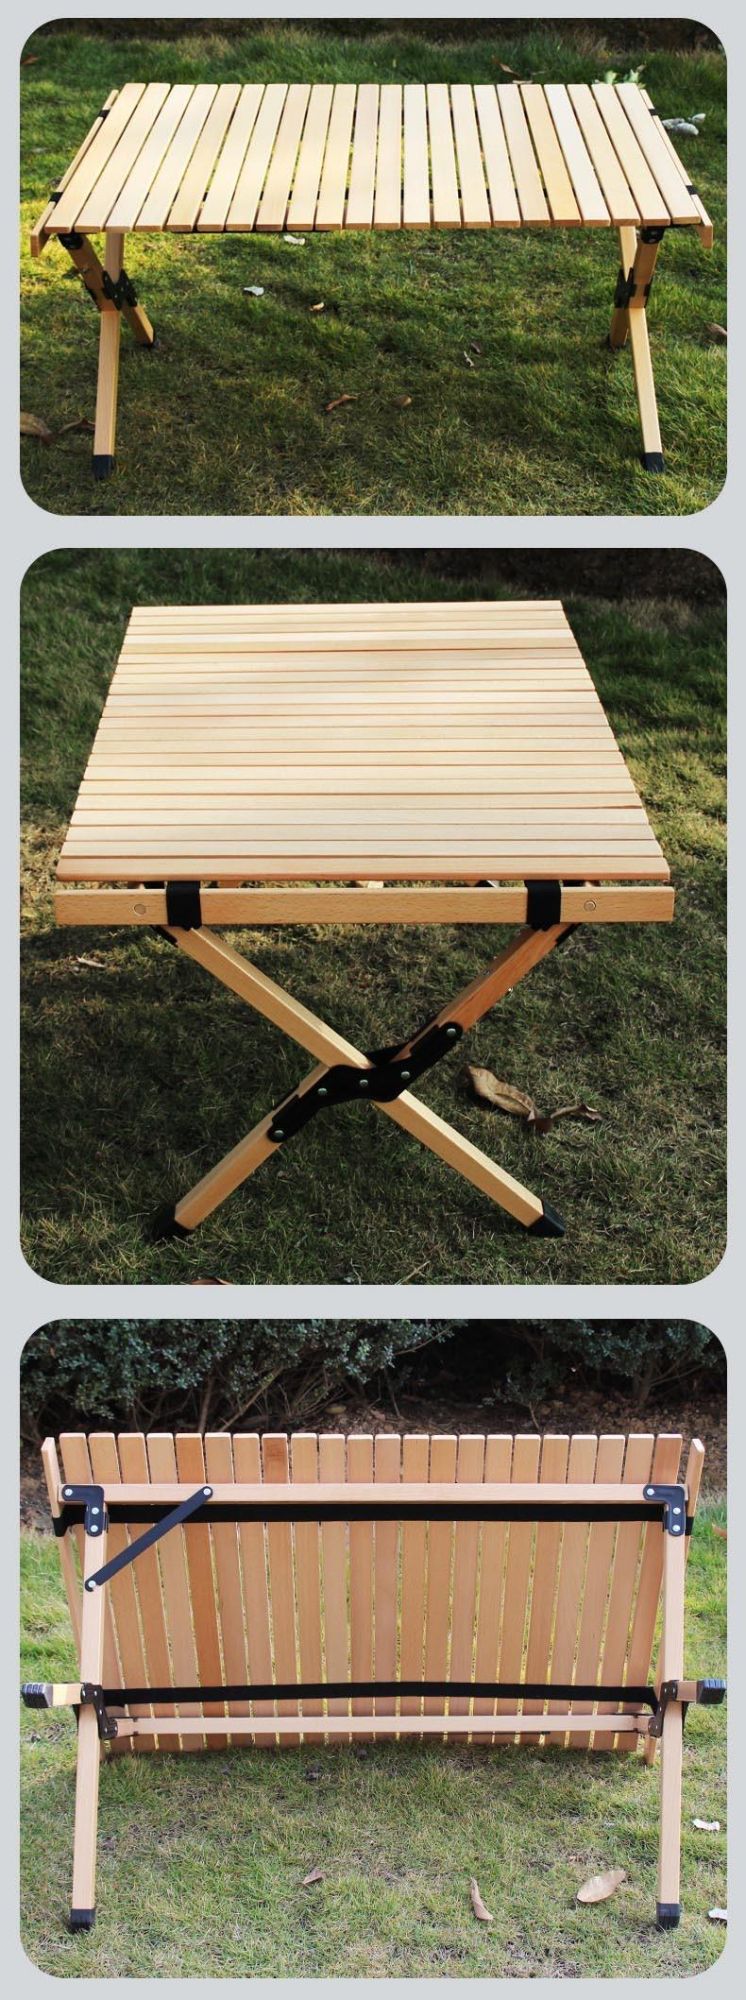 Wholesale OEM Logo Picnic Foldable Wood Camping Table Portable Folding Round Egg Roll Table